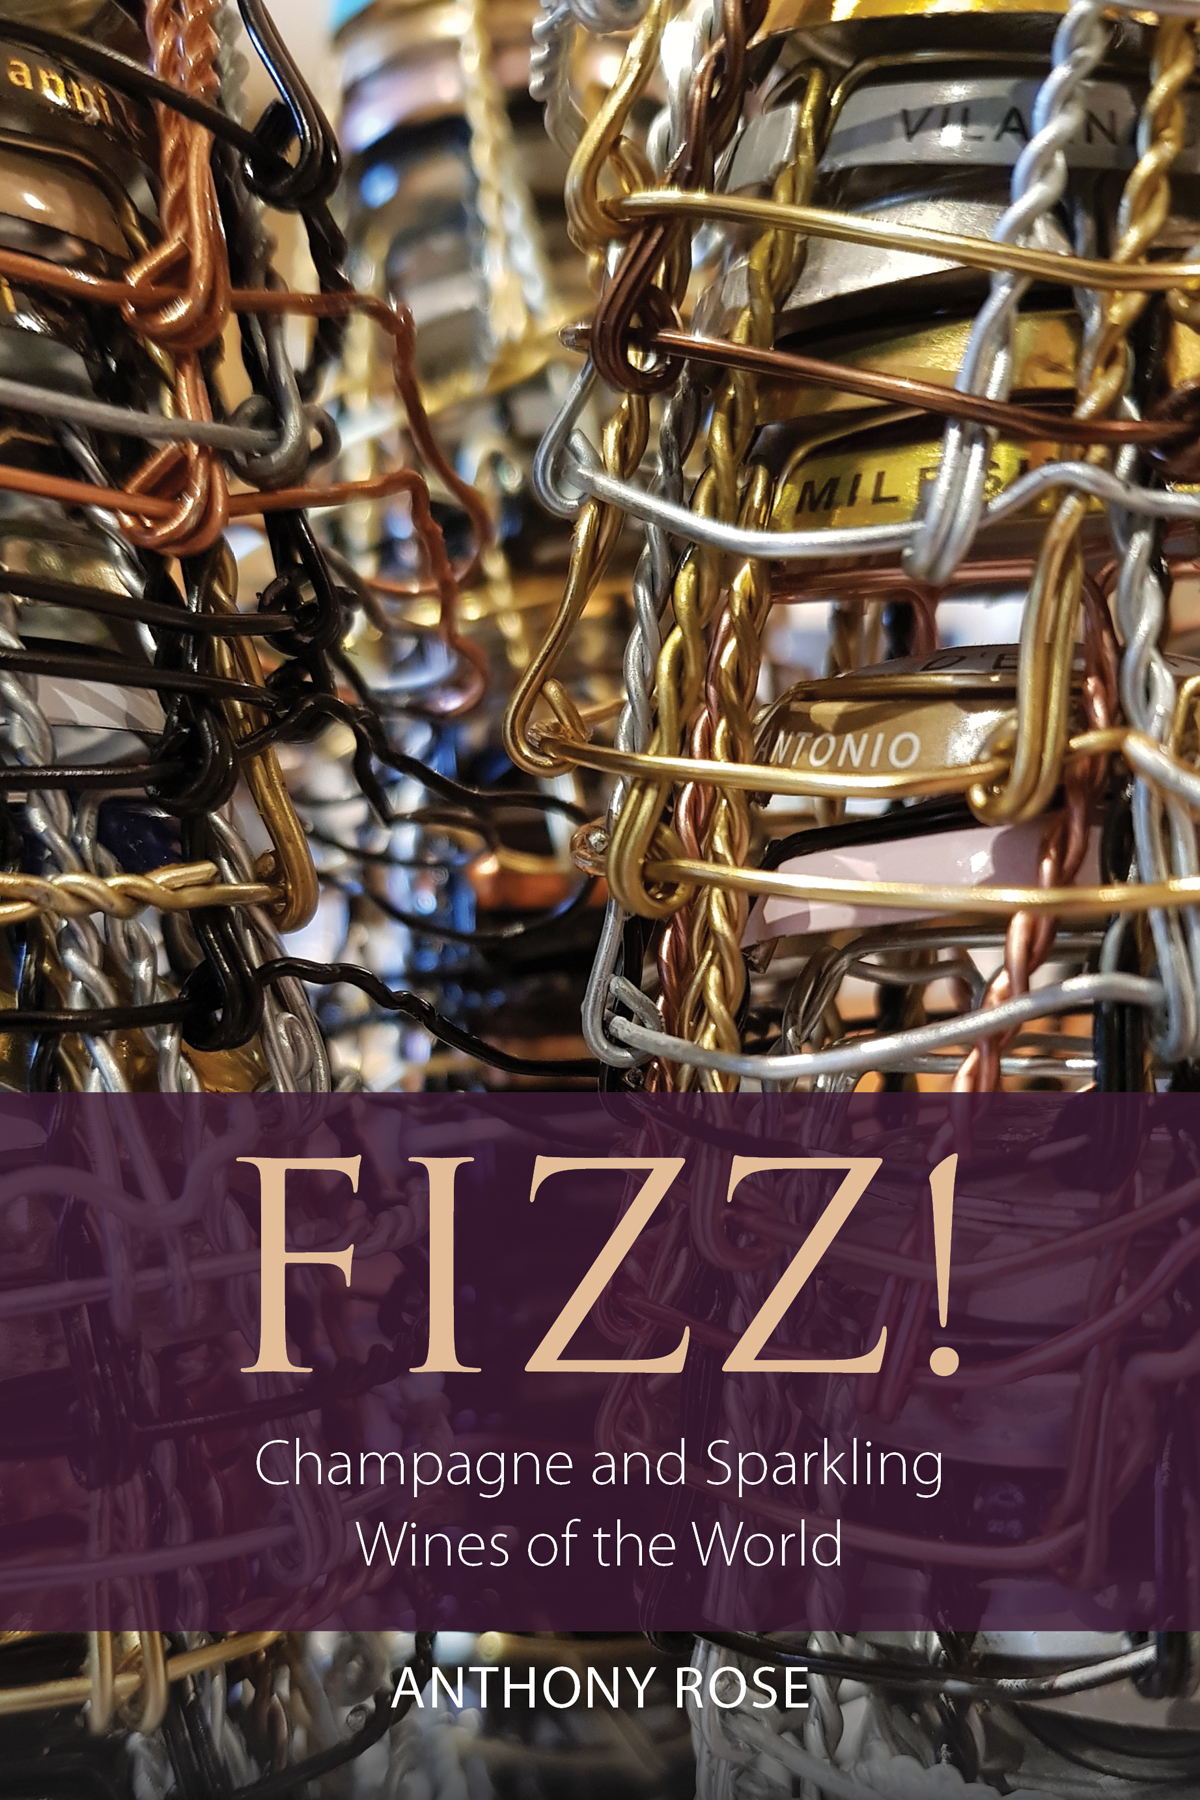 Extract: Fizz! by Anthony Rose